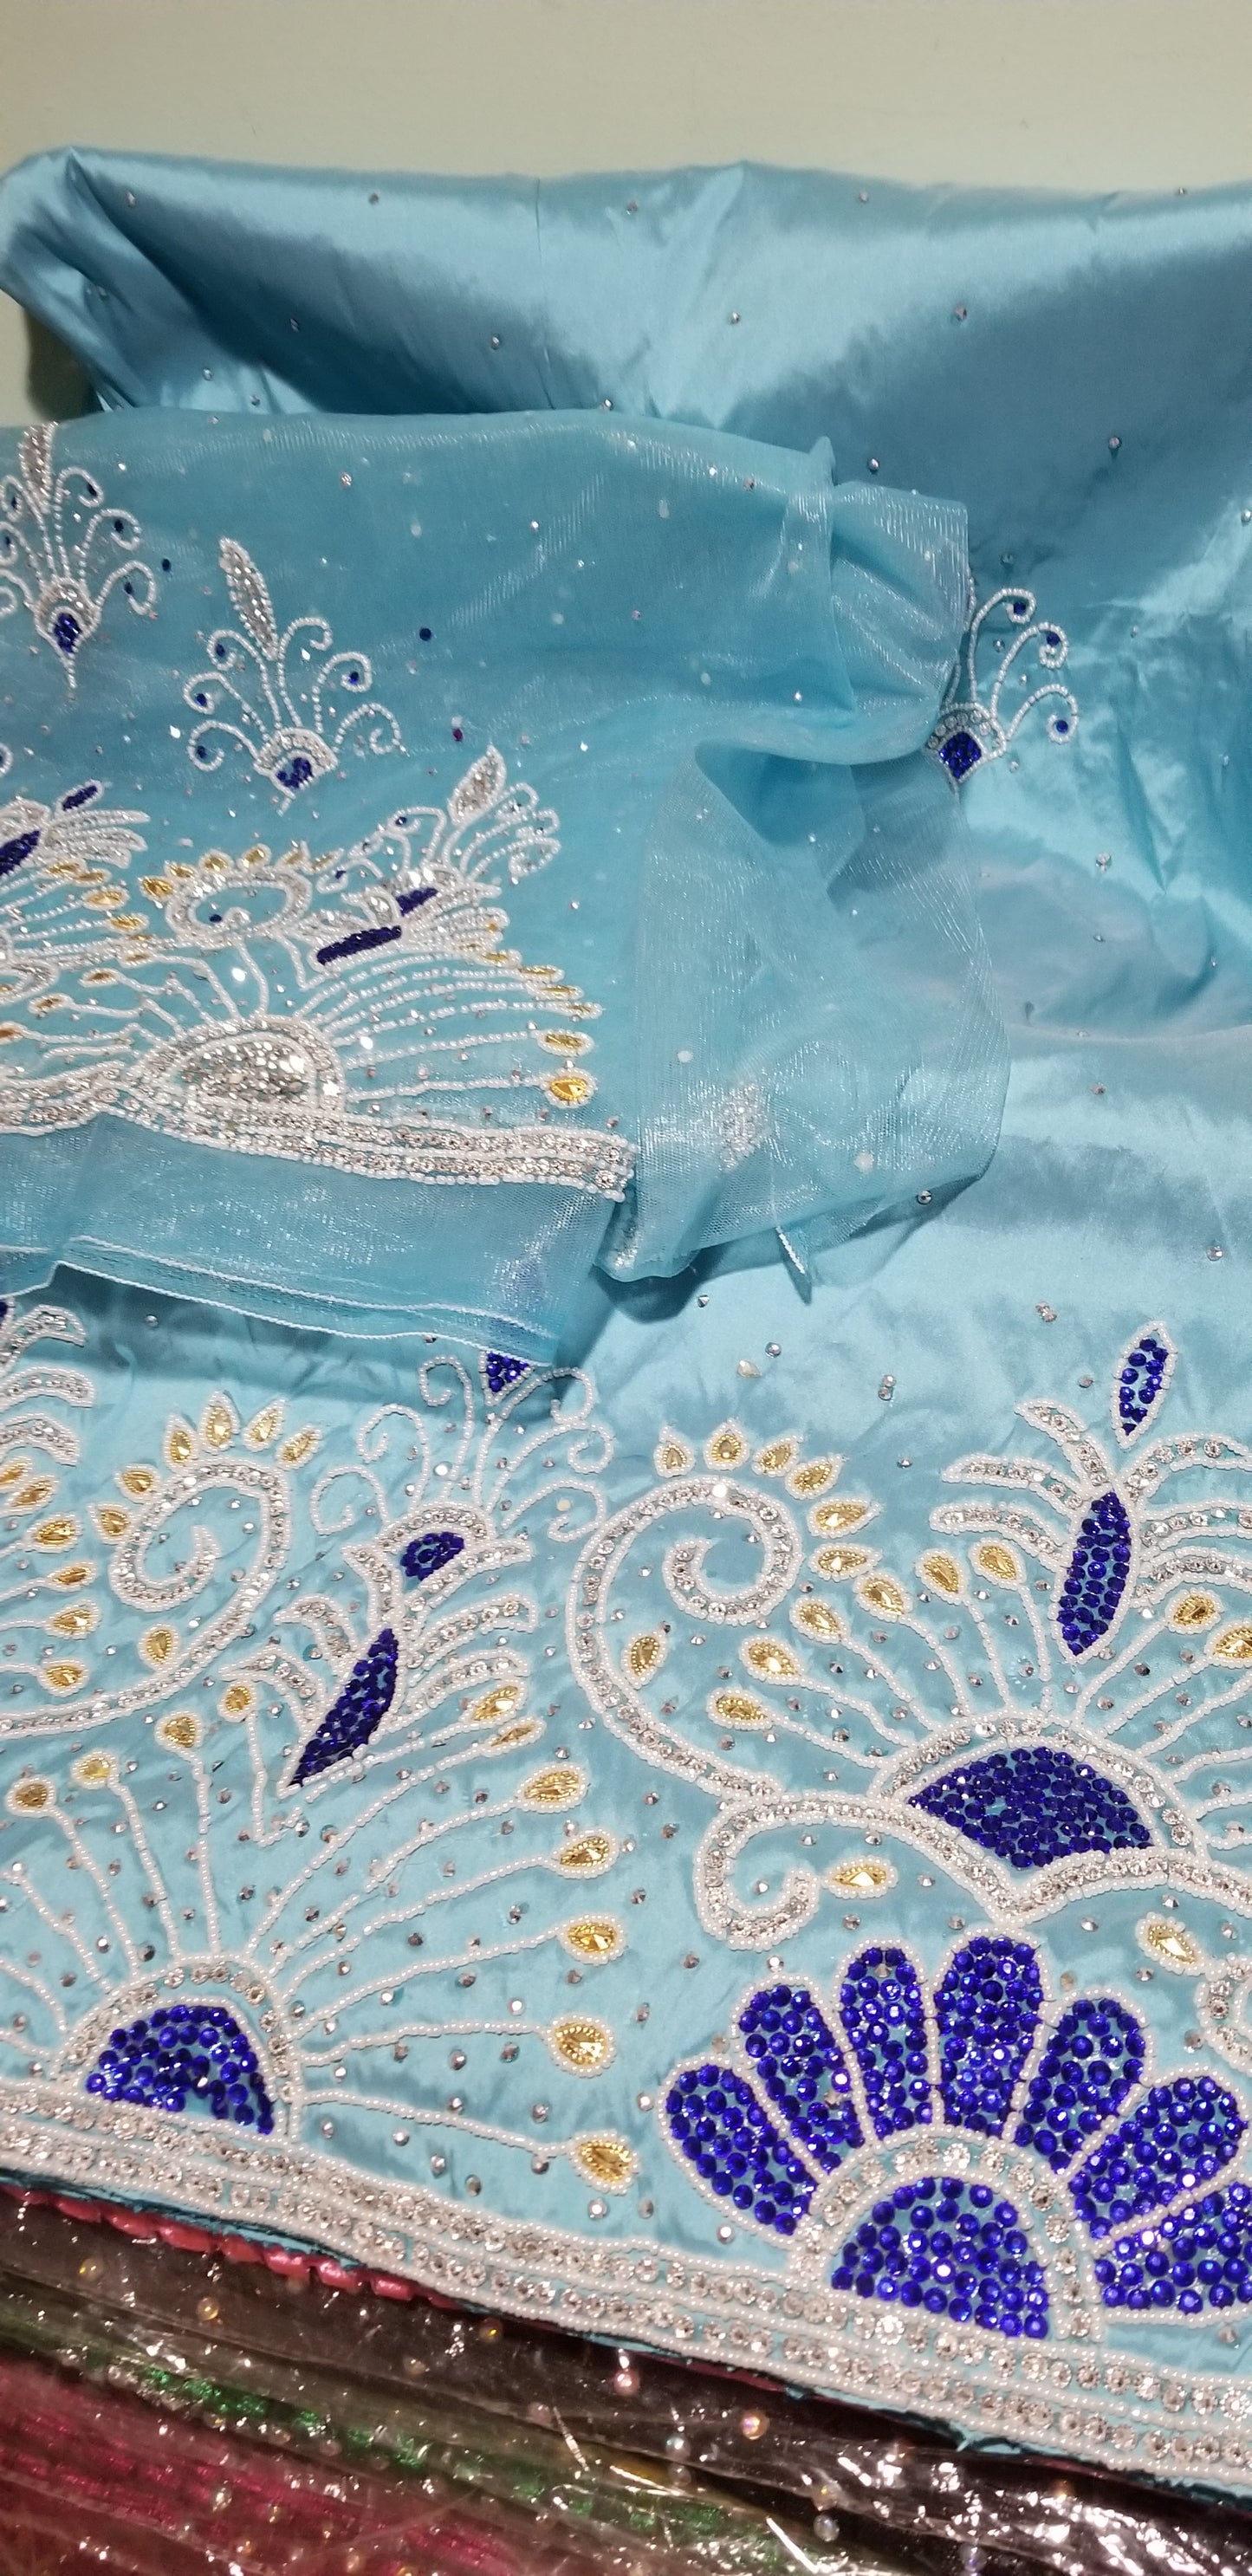 Back in stock Sky blue taffeta Silk George fabric with Matching blouse. Original/quantity India Silk George.  Sold as set of 5 yards + 1.8yds blouse